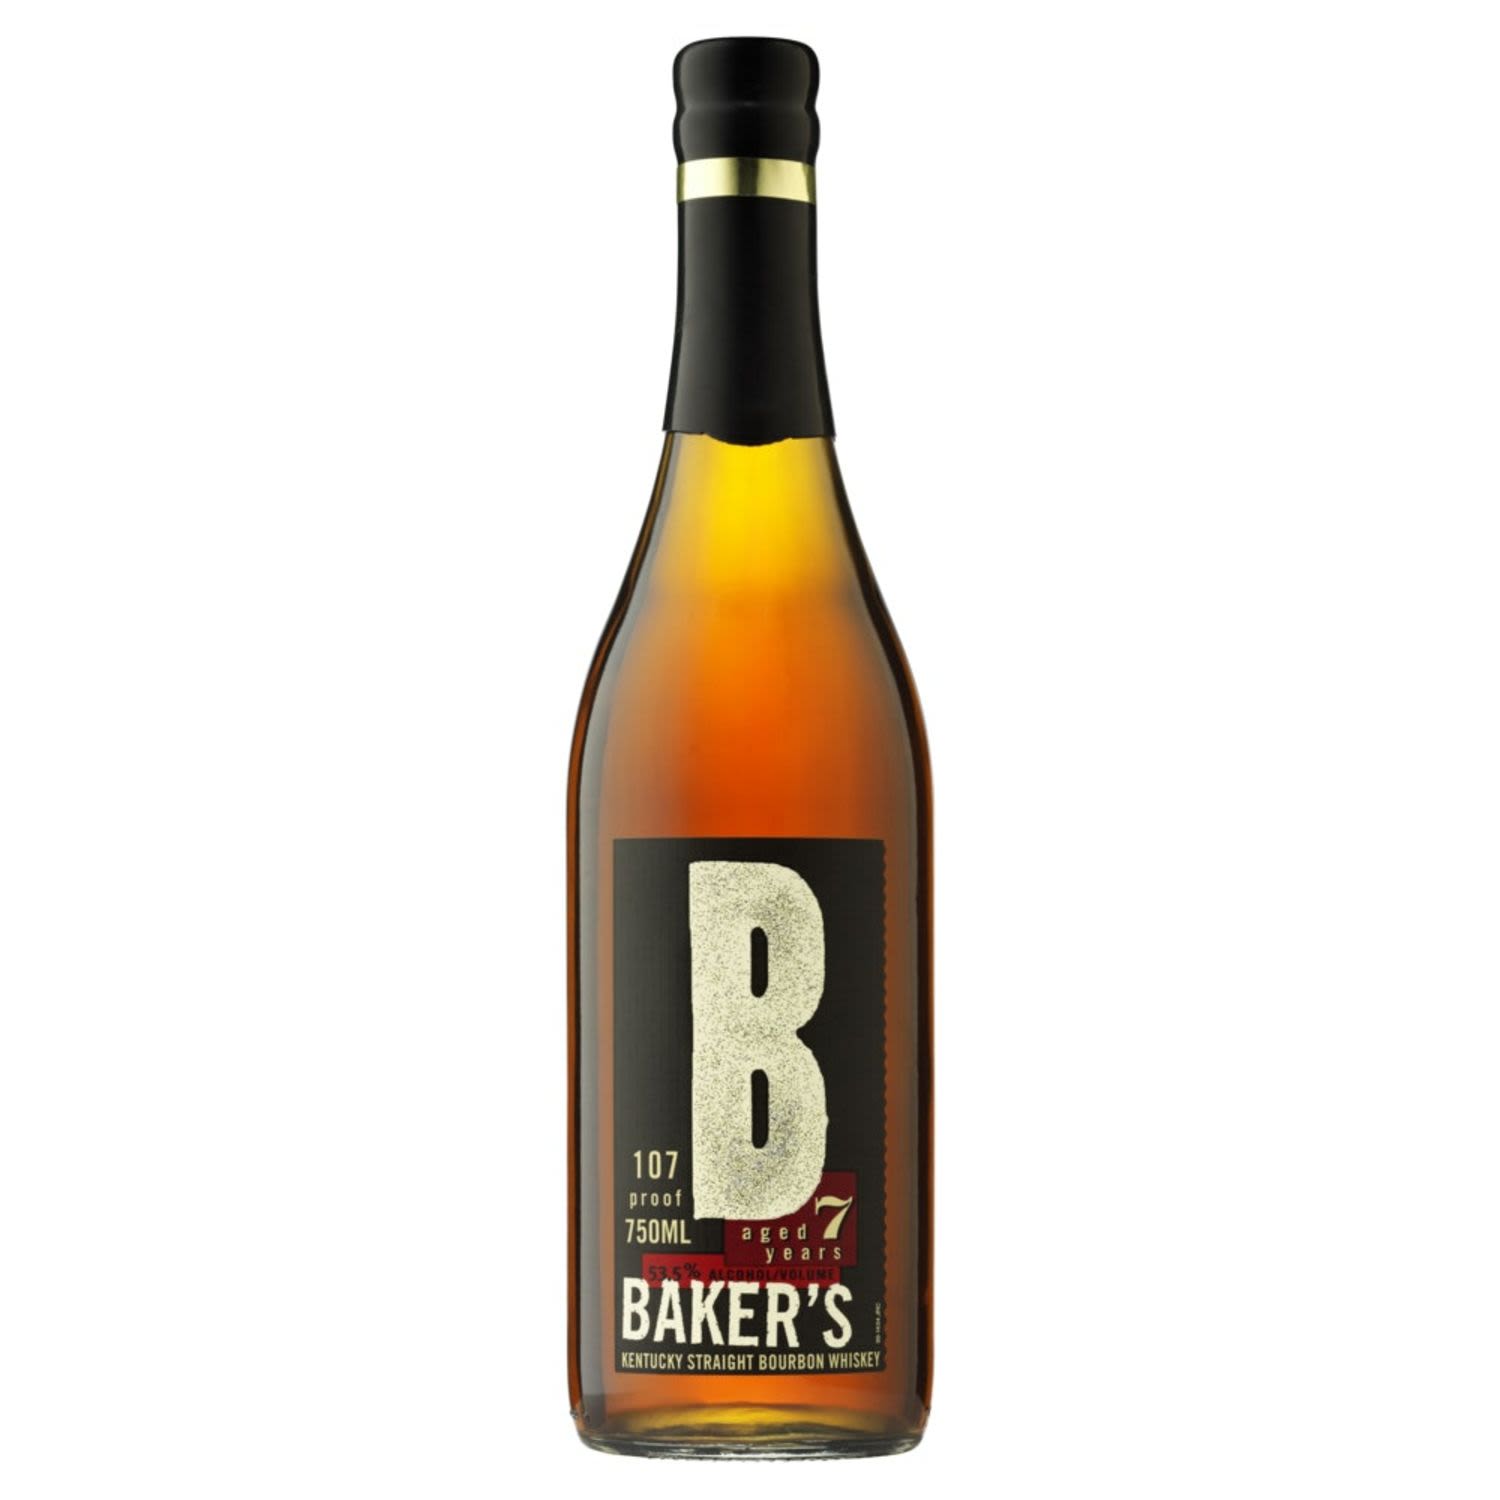 Baker’s is a part of Jim Beam’s Small Batch Collection. Hand-bottled after 7 years & at 107 proof. Medium-bodied taste with a delicious aroma full of fruit & vanilla. Best served in a snifter with a splash of spring water.<br /> <br />Alcohol Volume: 53.50%<br /><br />Pack Format: Bottle<br /><br />Standard Drinks: 32</br /><br />Pack Type: Bottle<br /><br />Country of Origin: USA<br />